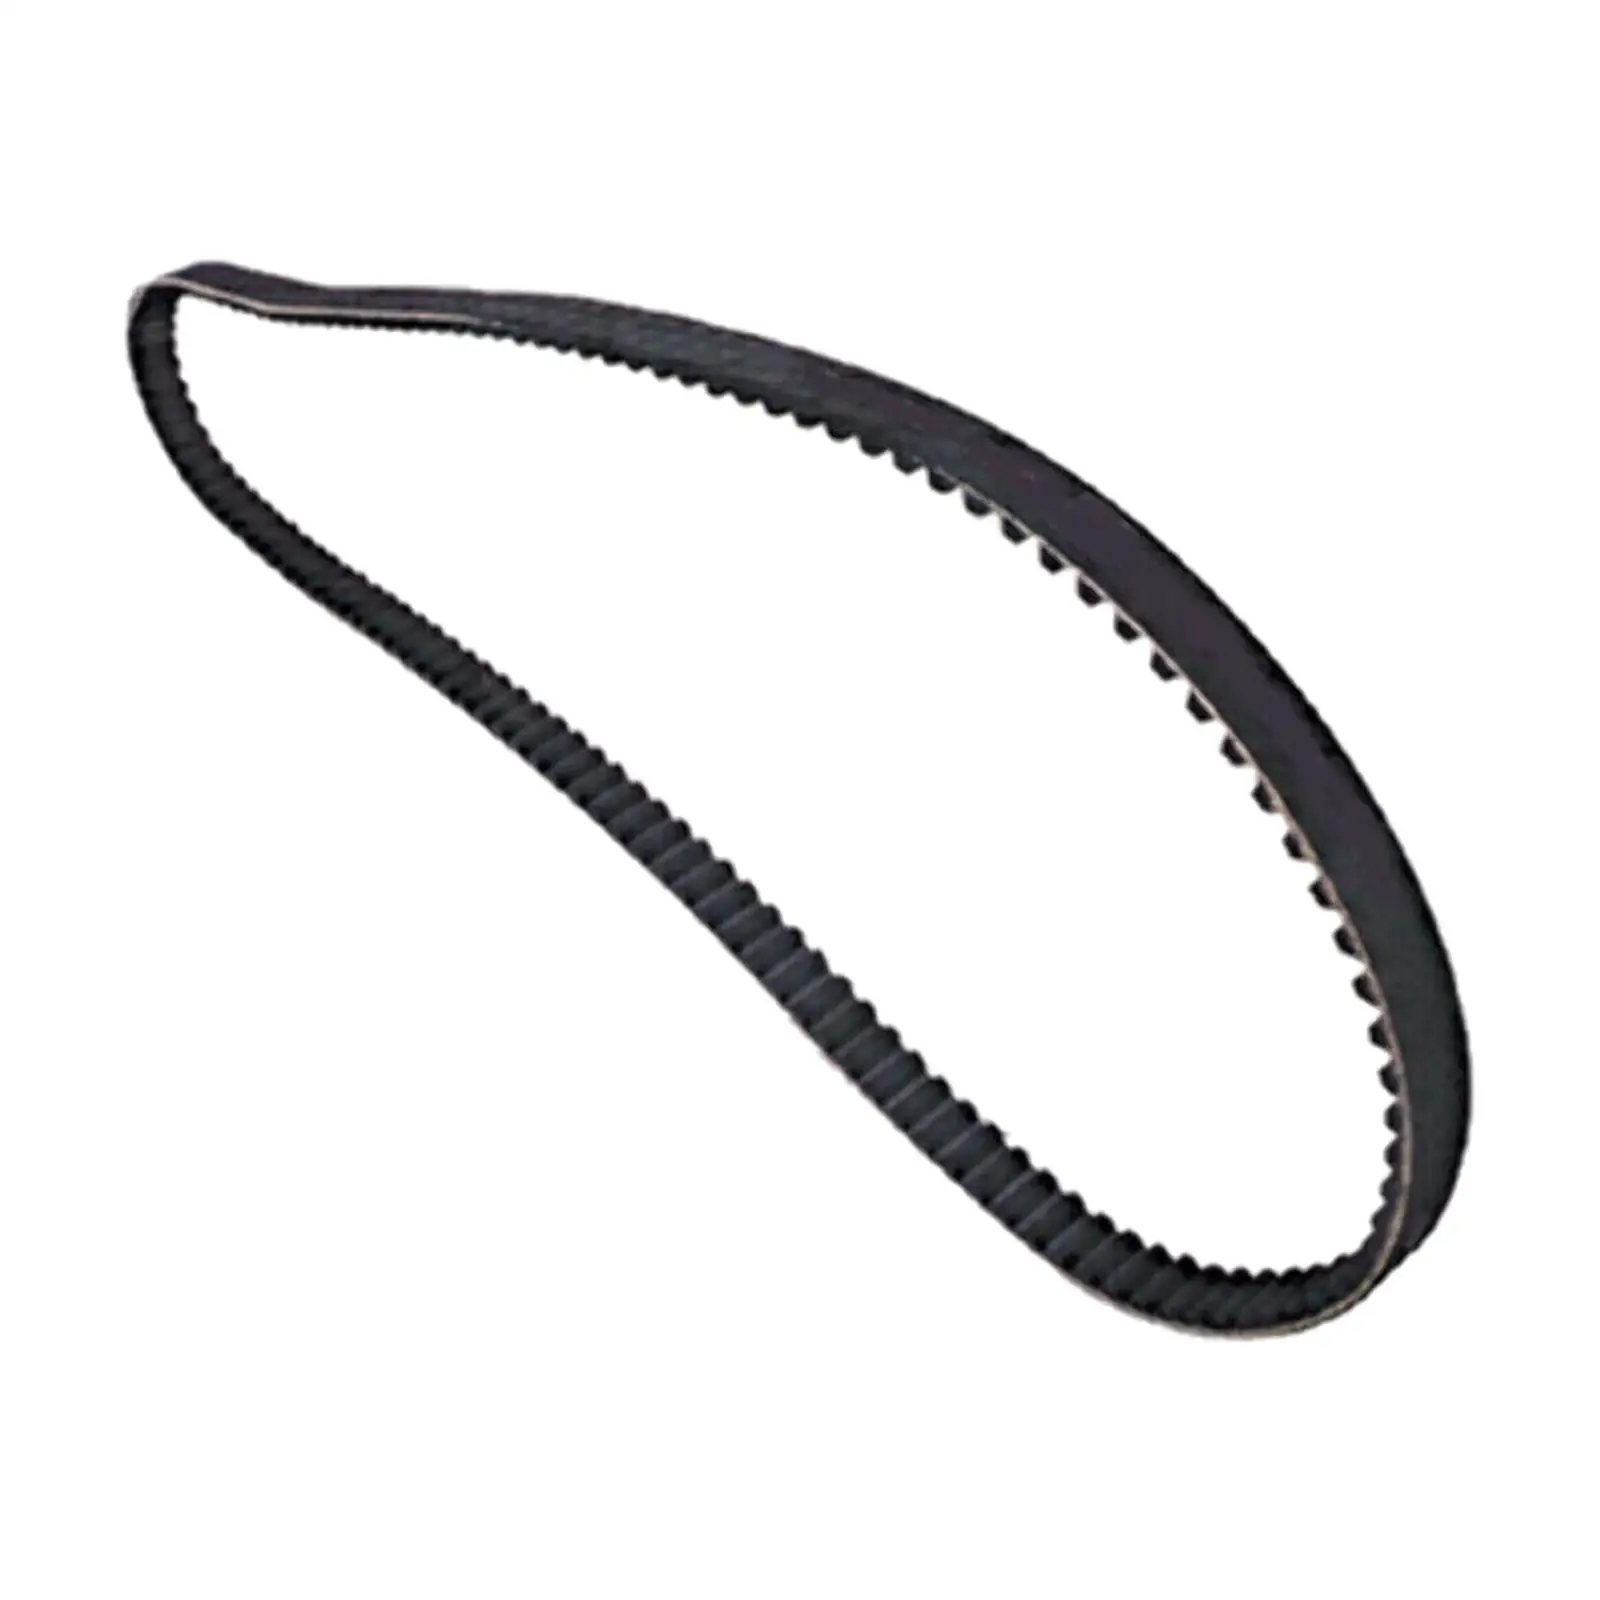 Rear Drive Belt 1204-0051 133 Tooth 1 1/8